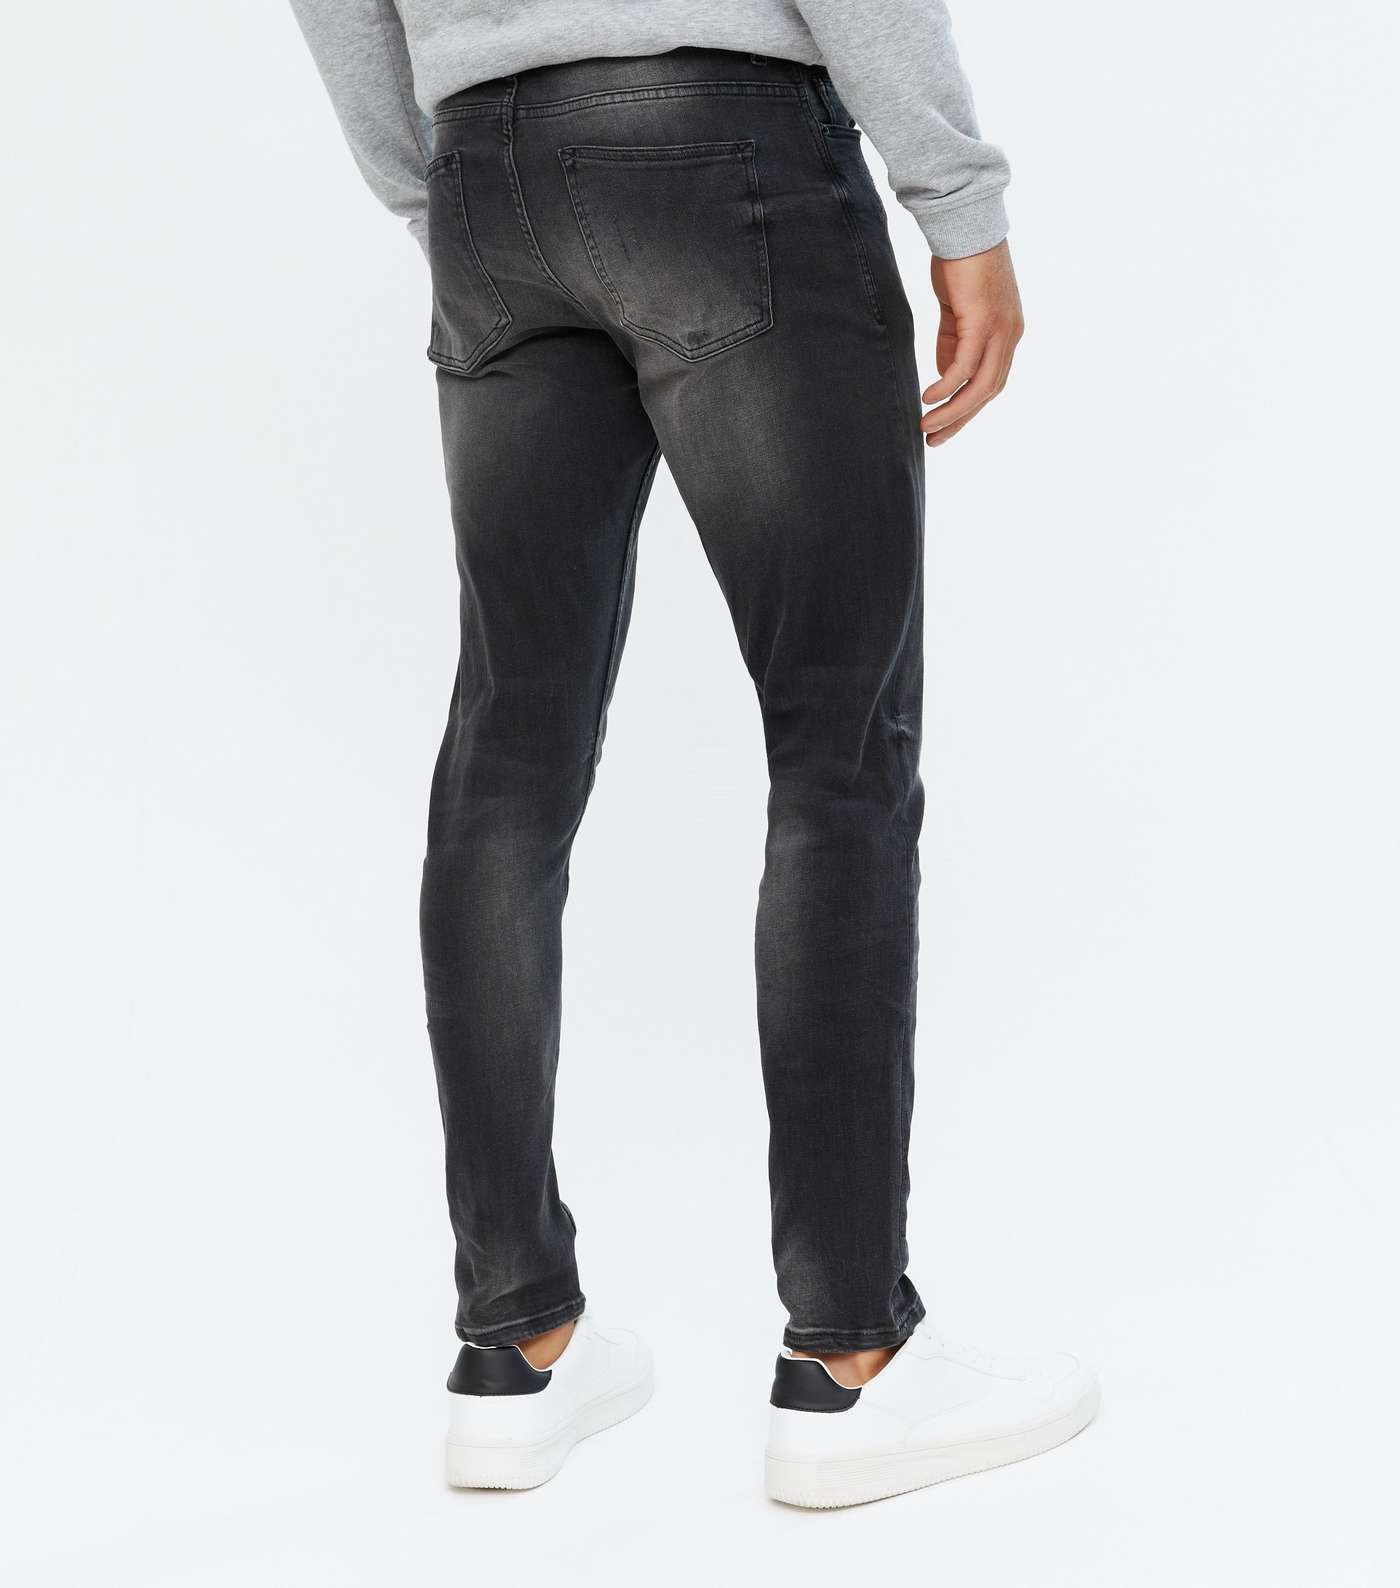 Black Washed Ripped Skinny Fit Jeans Image 4